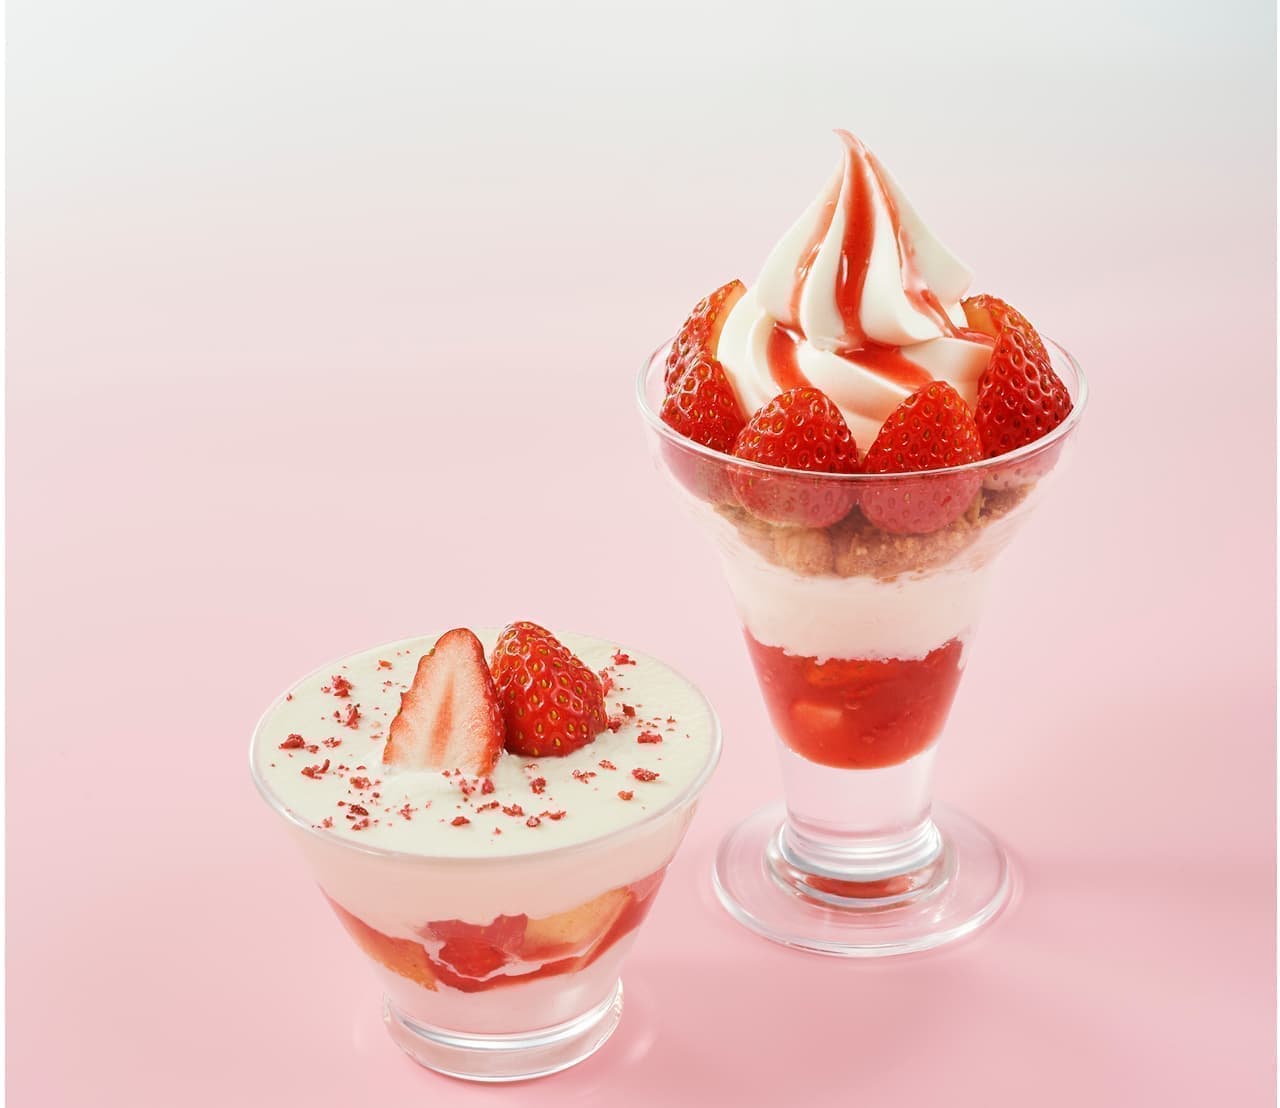 "Strawberry Parfait" "Strawberry Short in a Glass" at MUJI Cafe & Meal MUJI